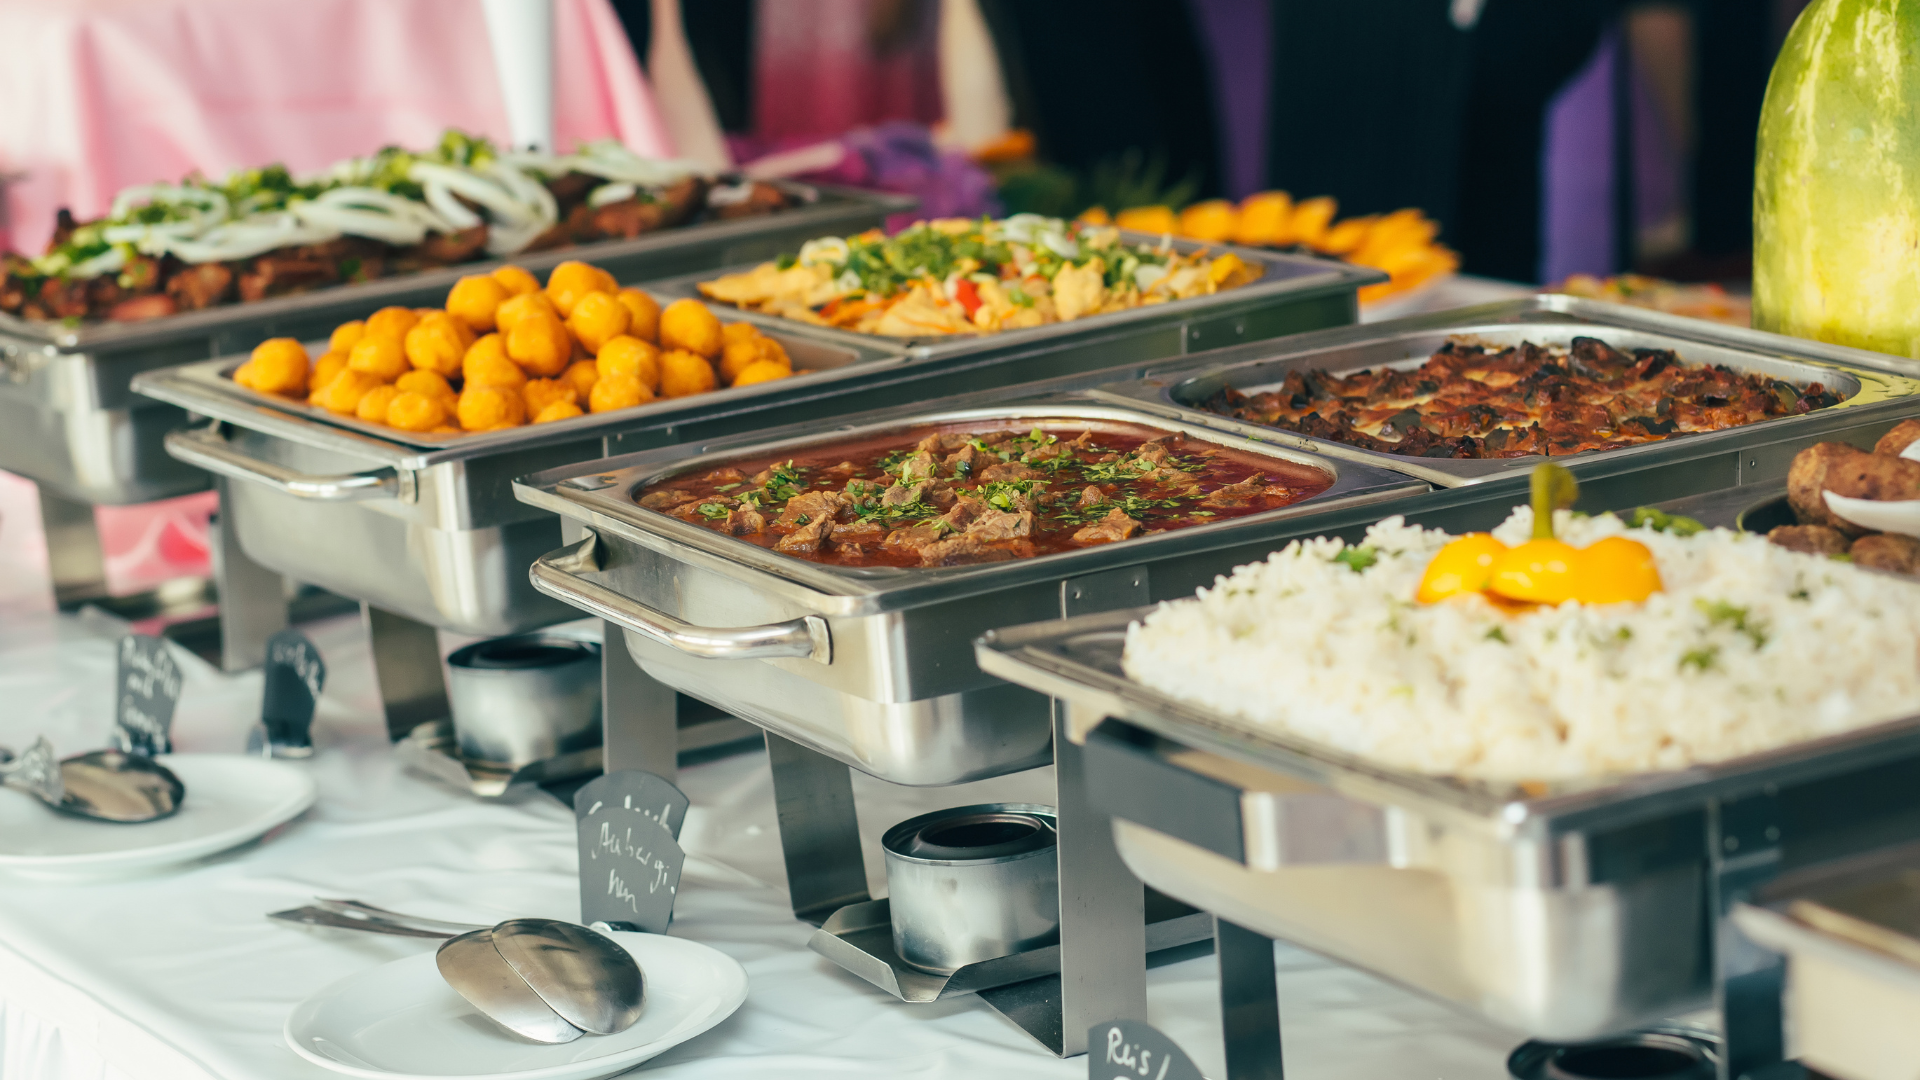 Wedding caterer wedding food how to find food caterer in malaysia malaysia food caterer malaysia wedding caterer malaysia wedding food selangor food caterer kl food caterer